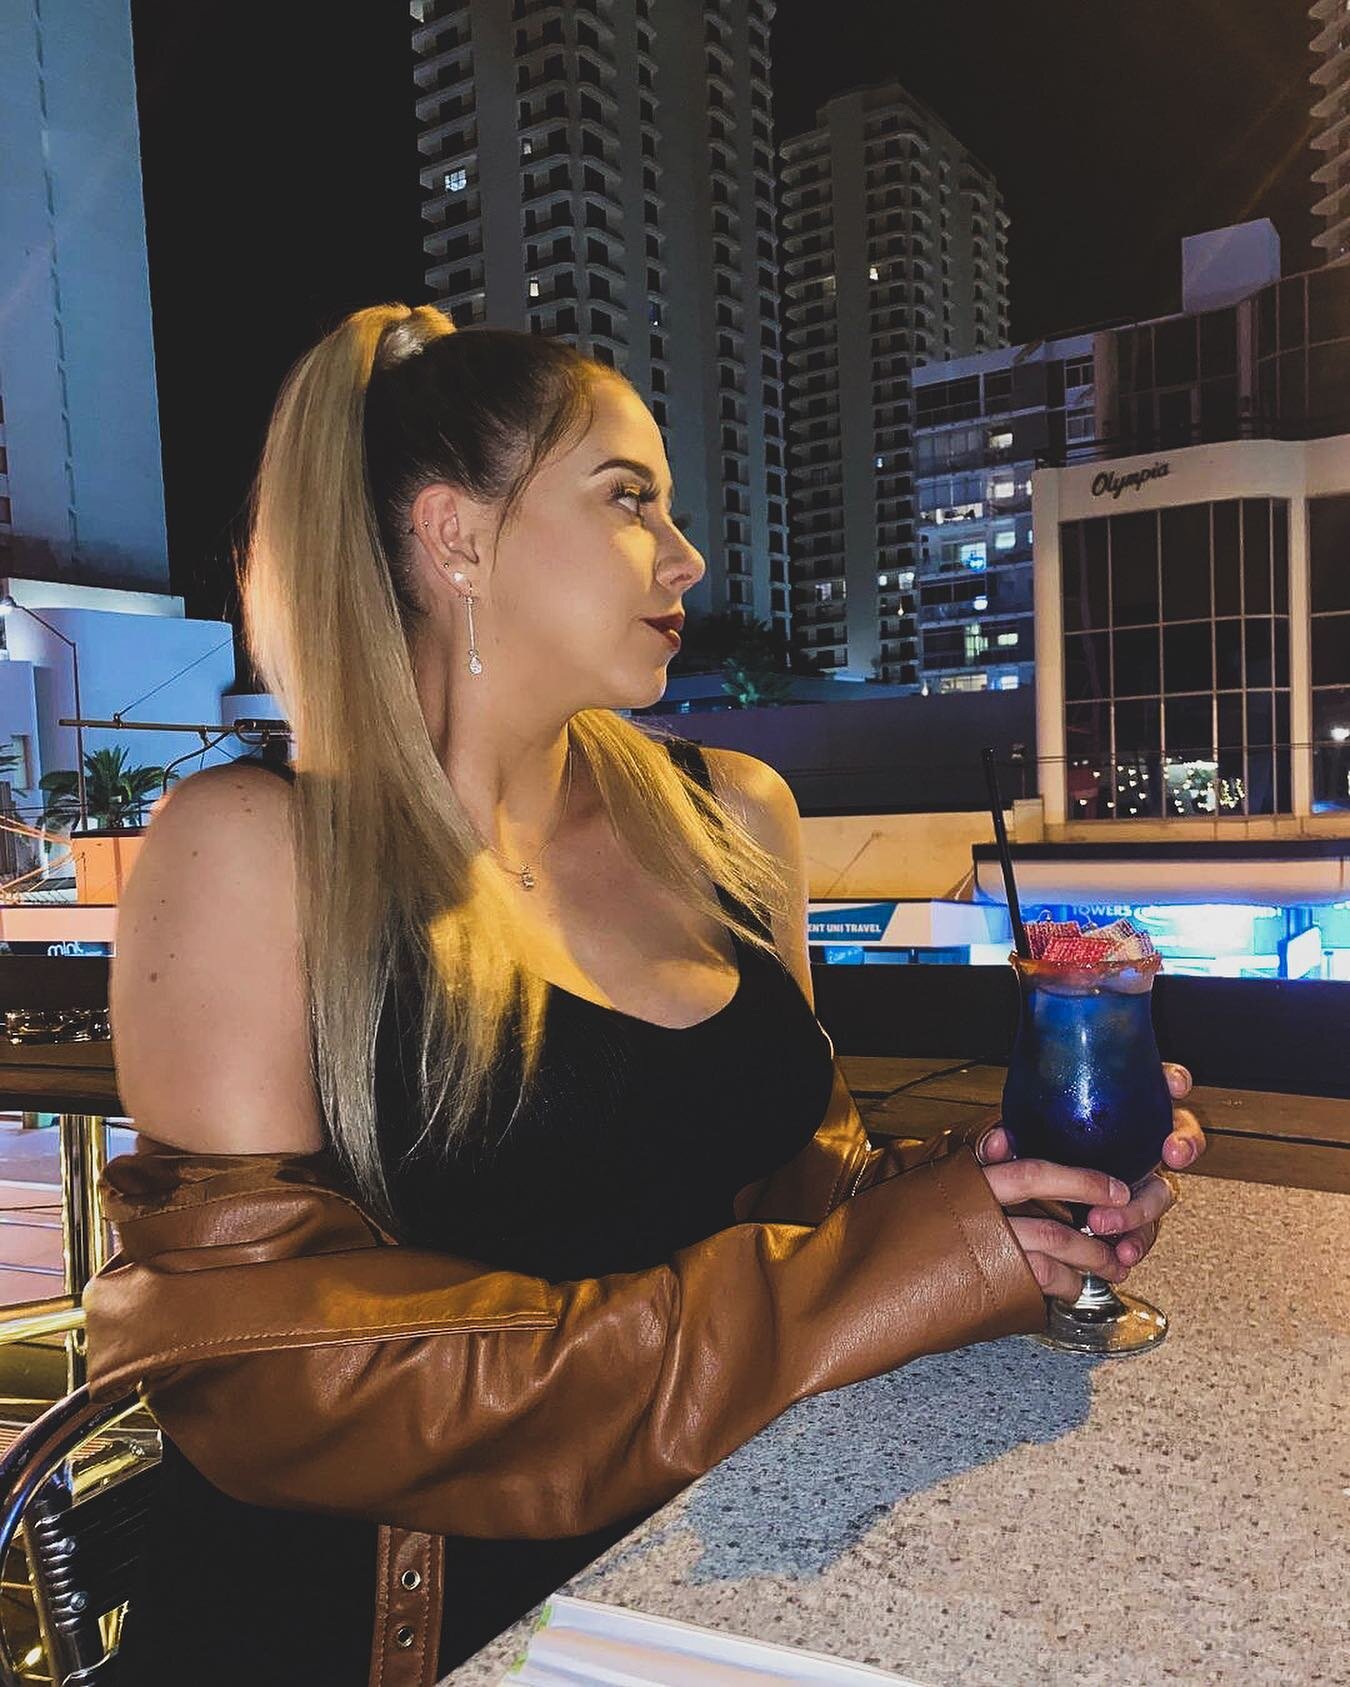 Cocktails on the KooKoo rooftop with @carlykillingback🍸 We'll be serving up cocktails starting at $10 from 5pm tonight, see you here! 💃 
⠀⠀⠀⠀⠀⠀⠀⠀⠀
#kookooteppanyaki #surfersparadise #teppanyaki #cocktails #goldcoast